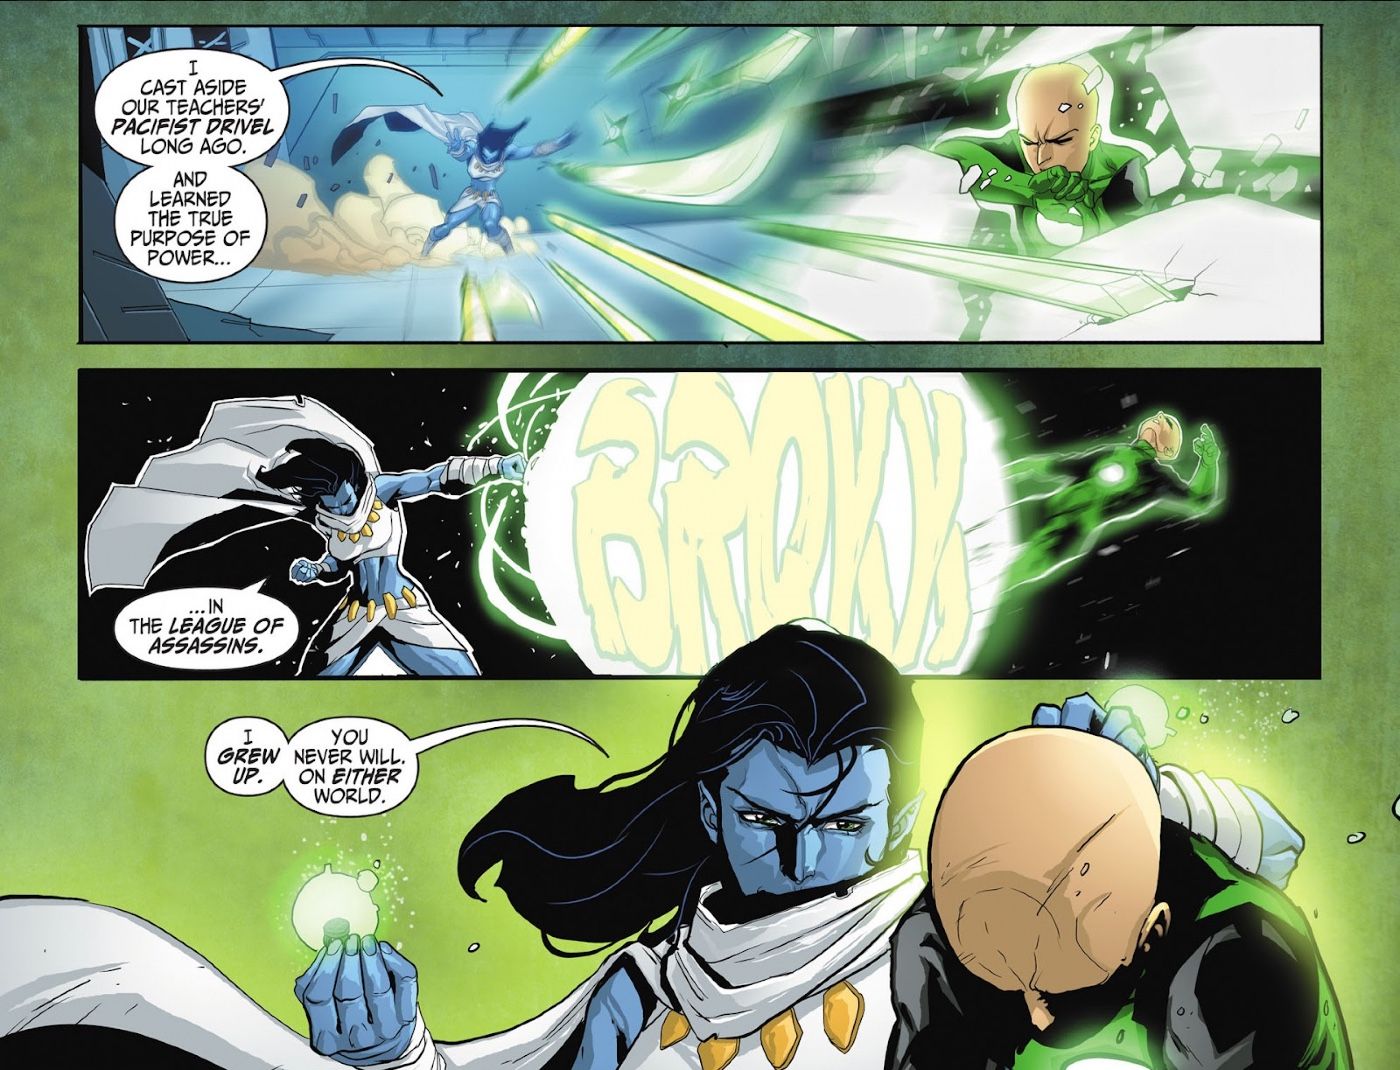 Comic book panels: a fight between a Green Lantern and a blue-skinned woman in white.